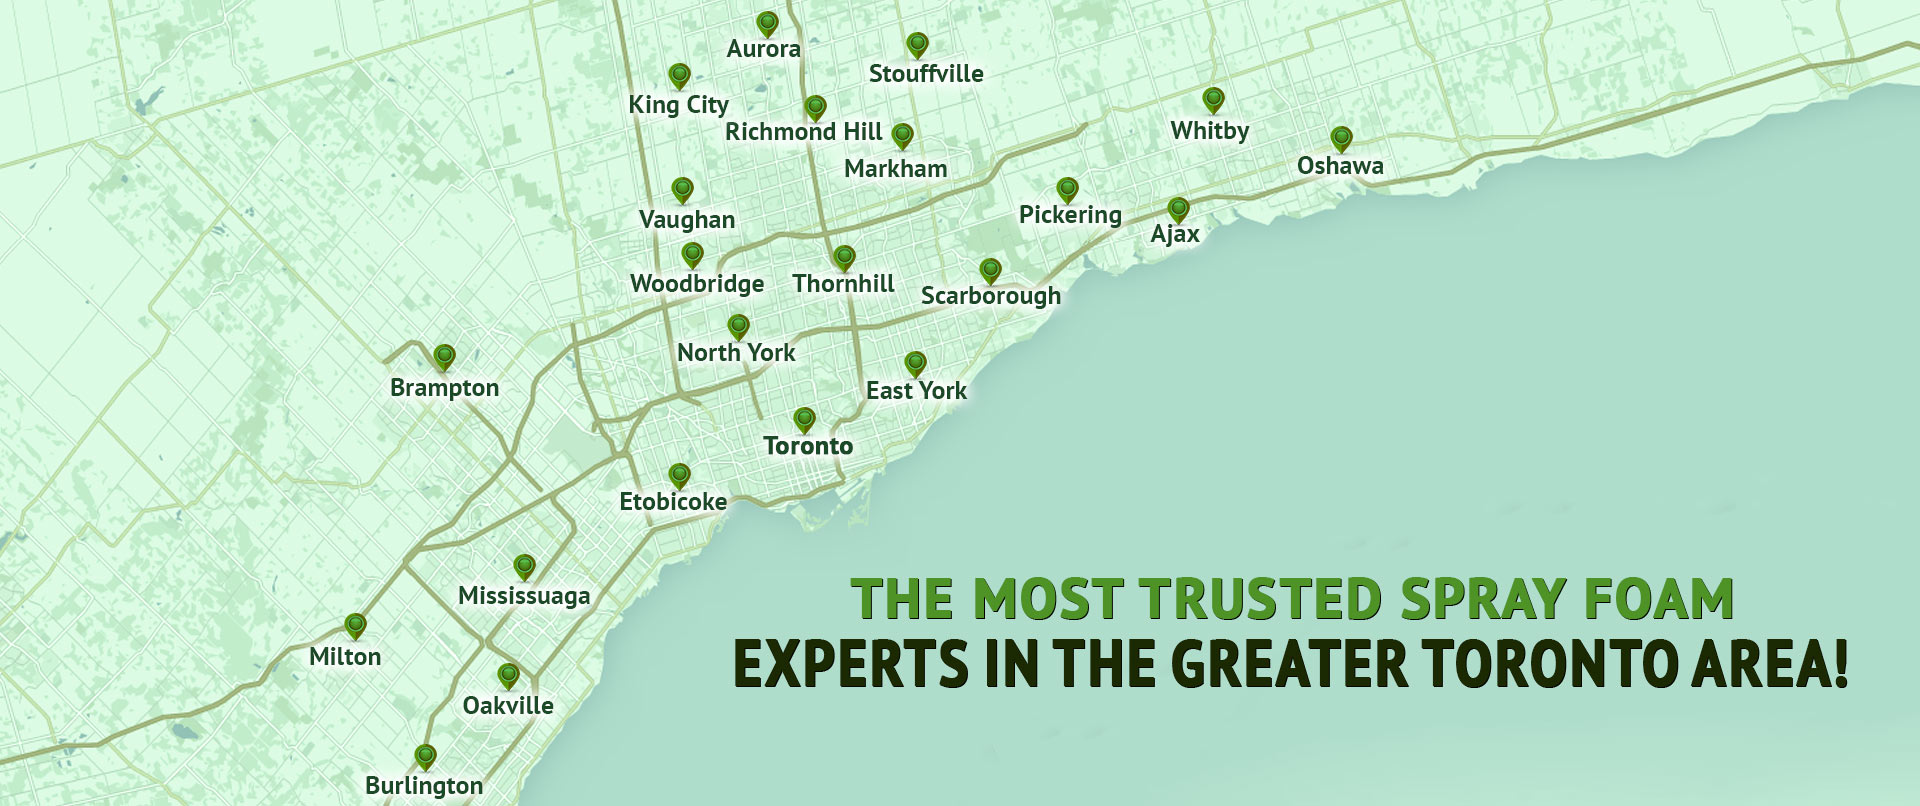 The Most Trusted Spray Foam Experts In The Greater Toronto Area Experts In The Greater Toronto Area!